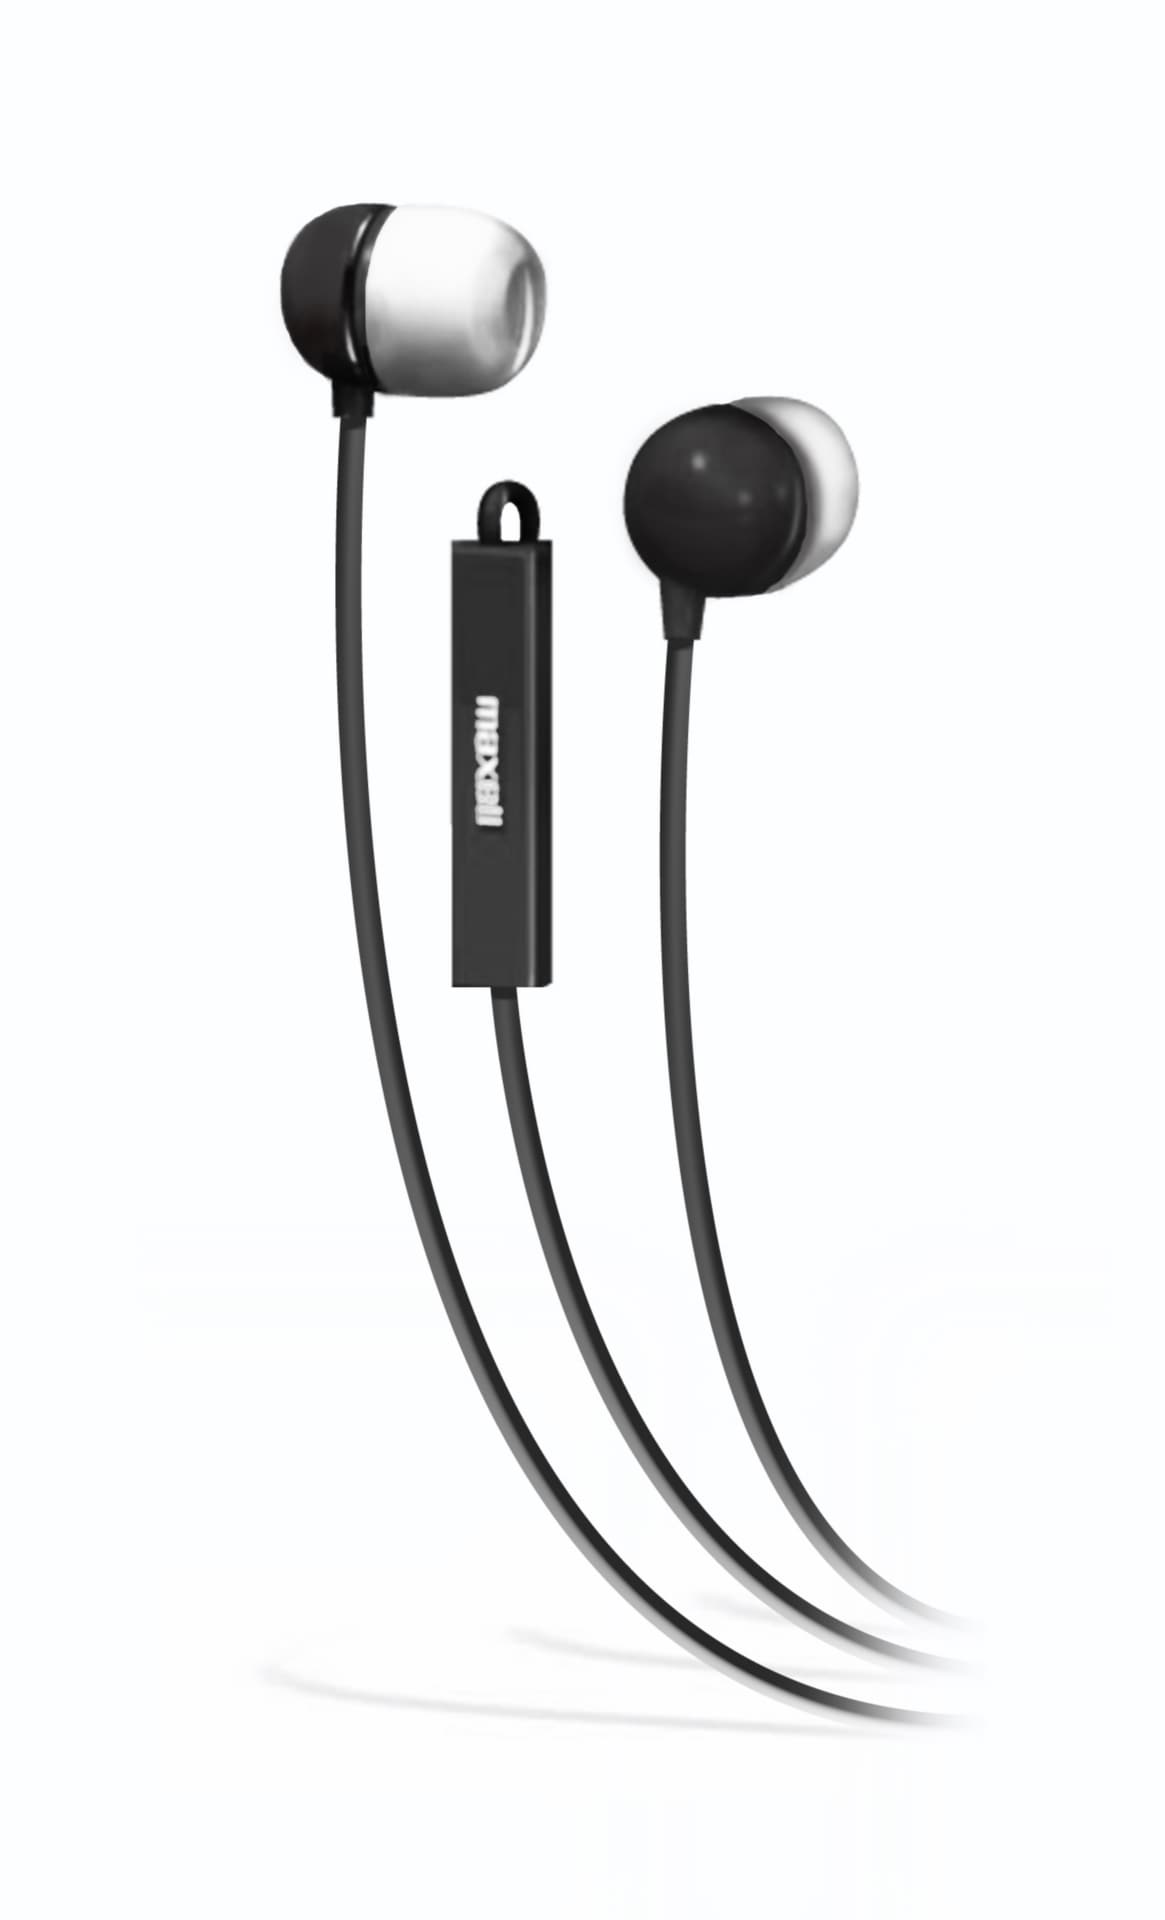 Maxell 190300 Earbuds - Black